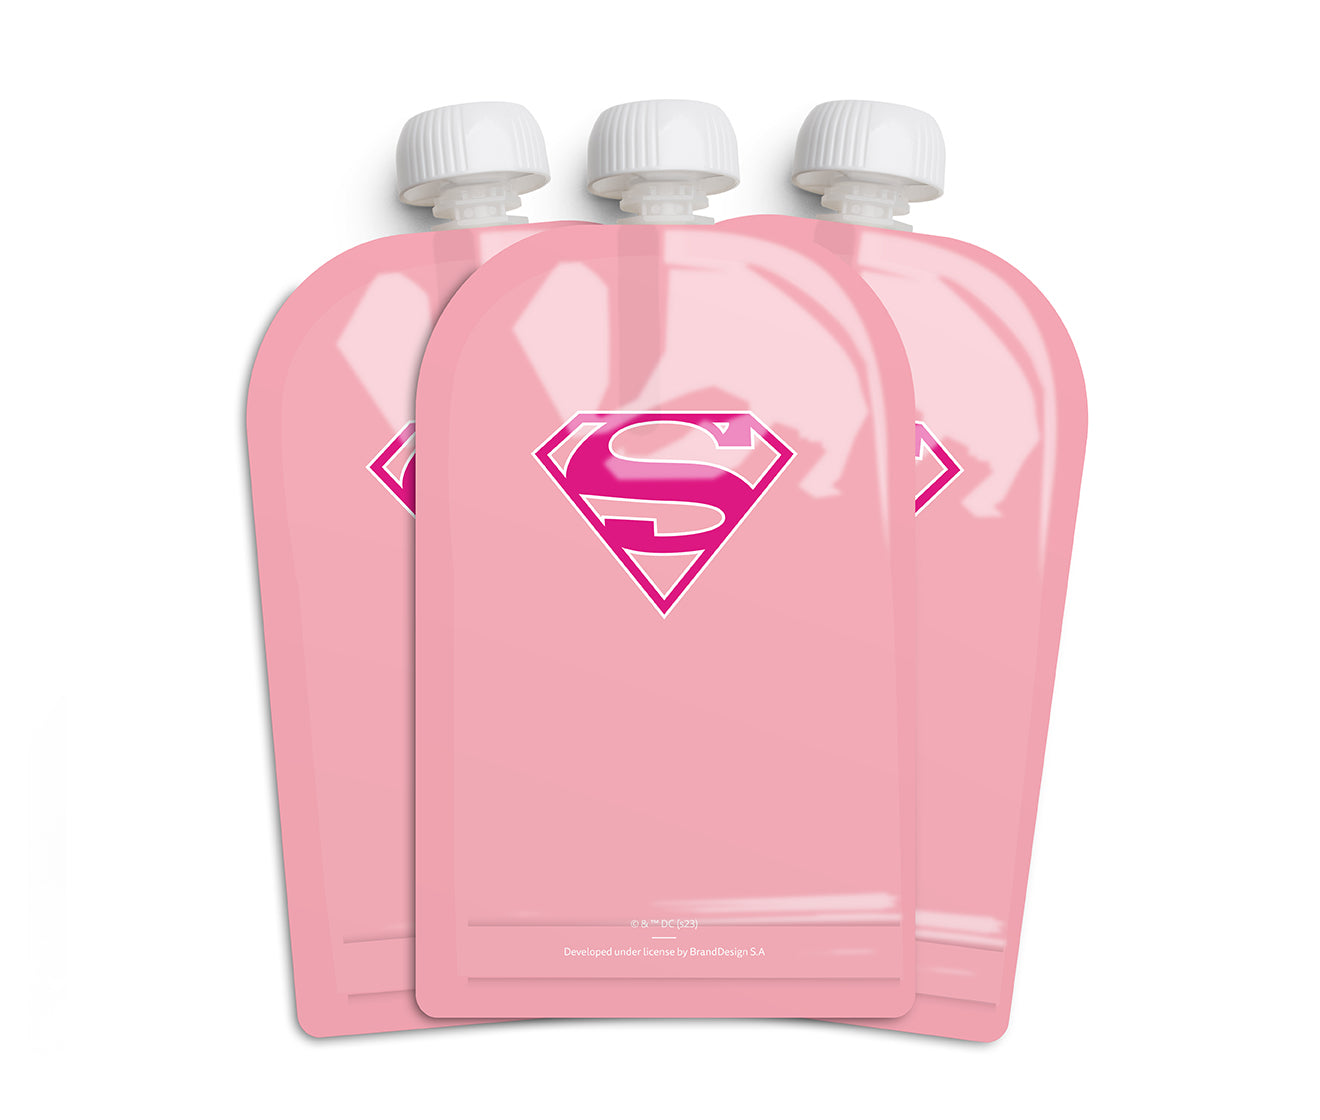 Food Pouch, Supergirl, 180 ml / 6 floz, 3-pack